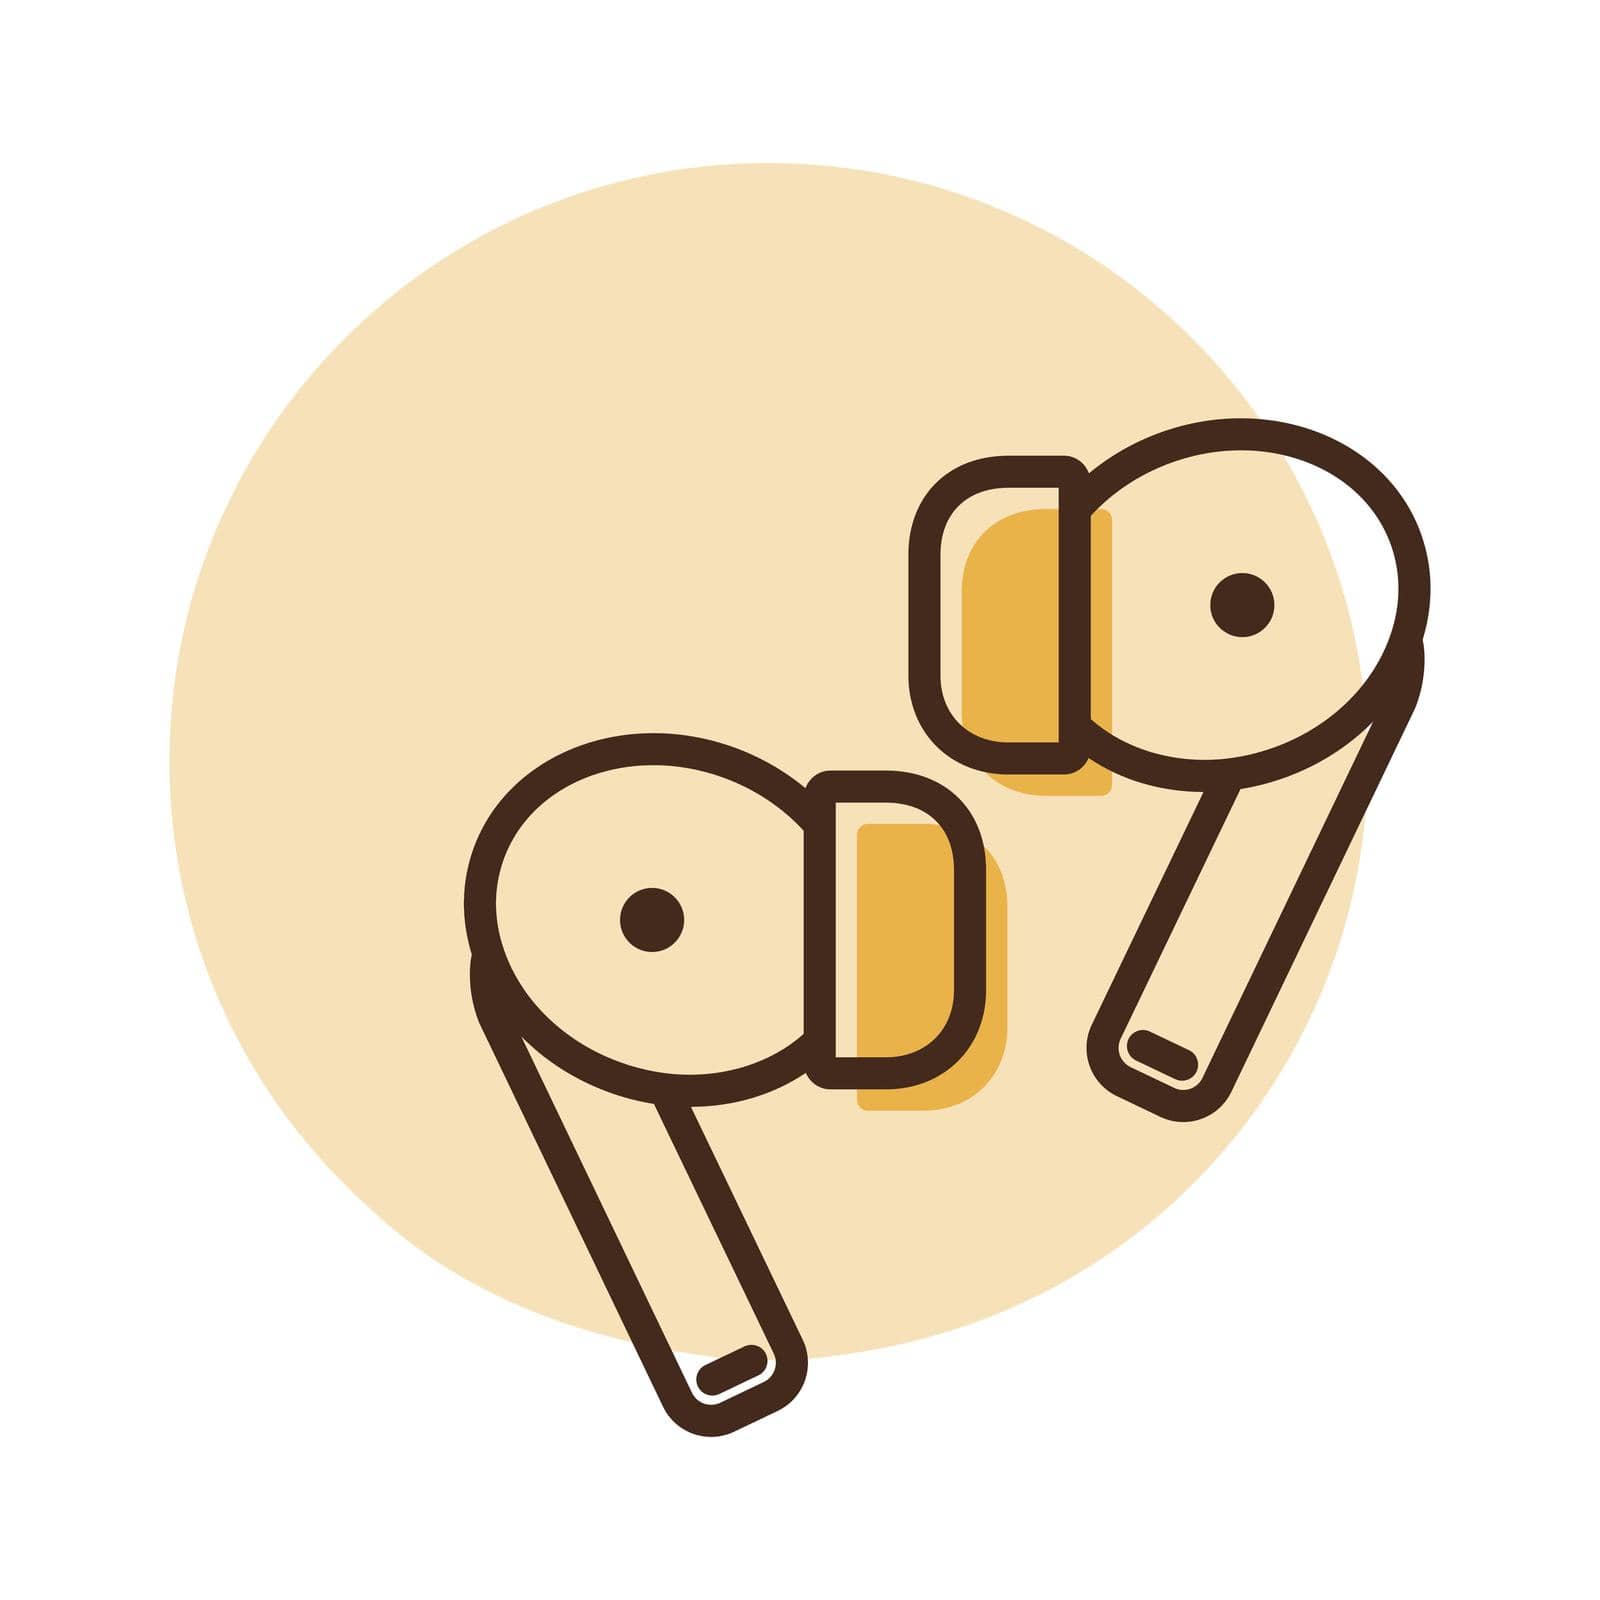 Pair of wireless earbud headphones vector icon. Graph symbol for music and sound web site and apps design, logo, app, UI